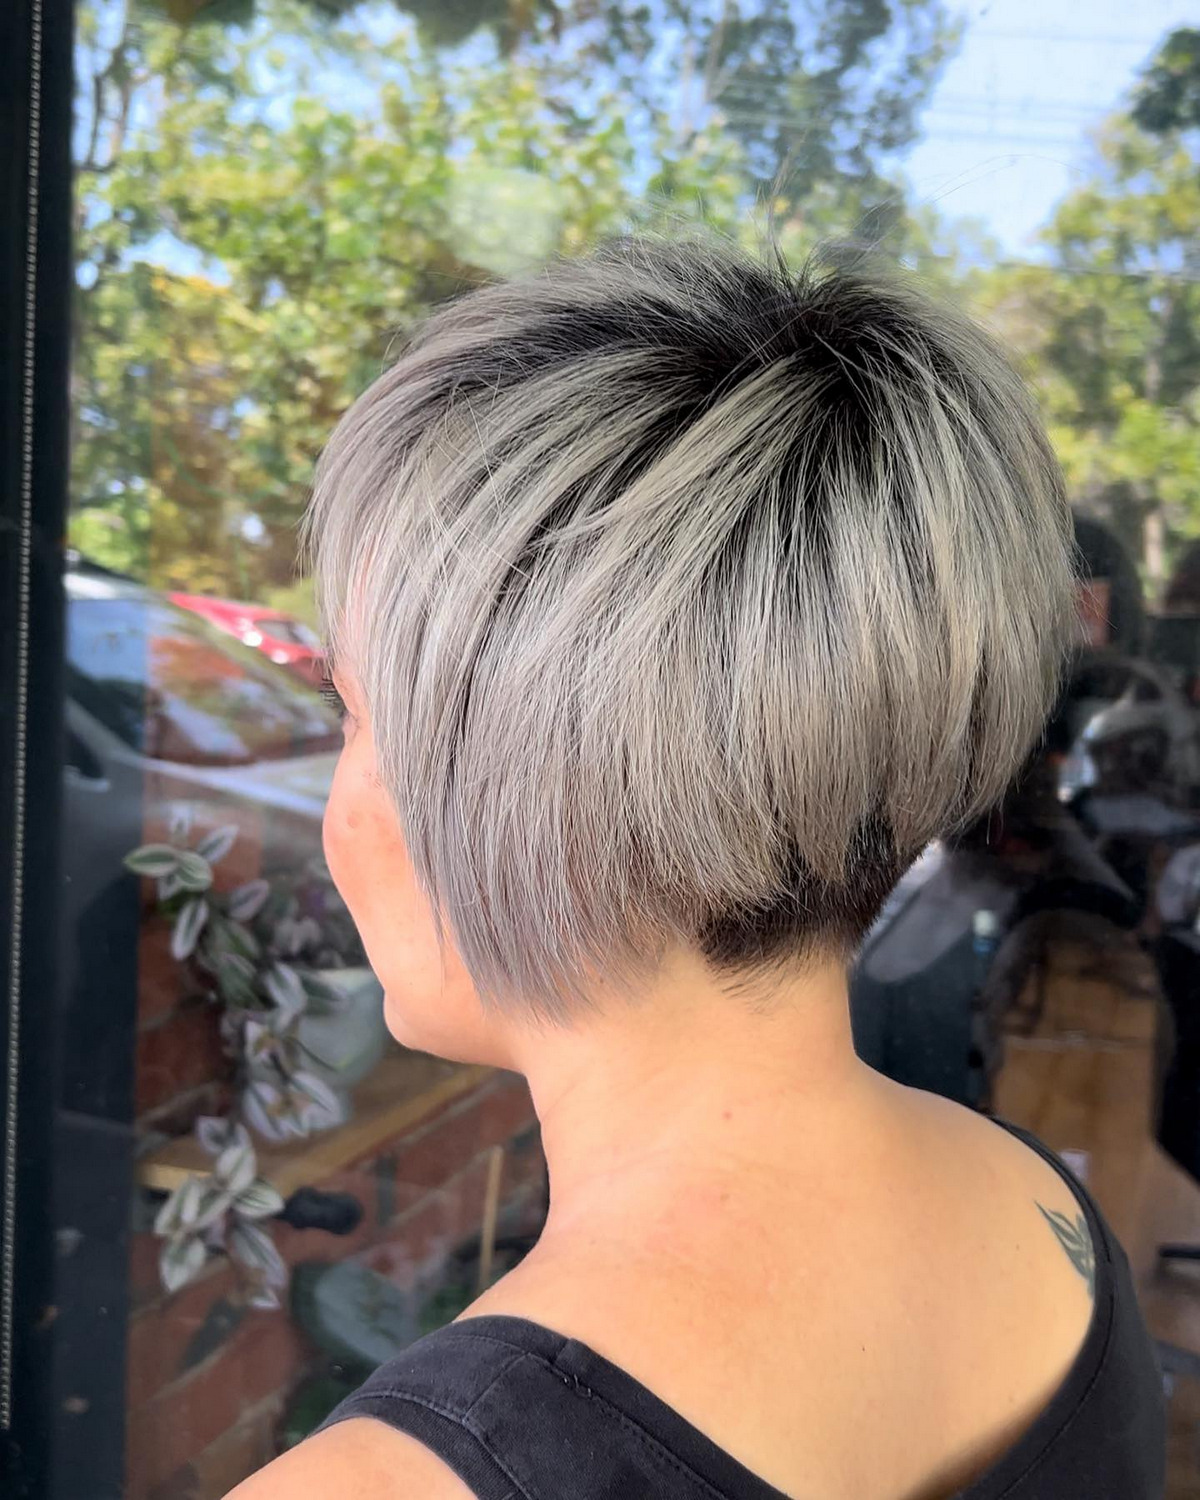  Short And Silver Hairstyle